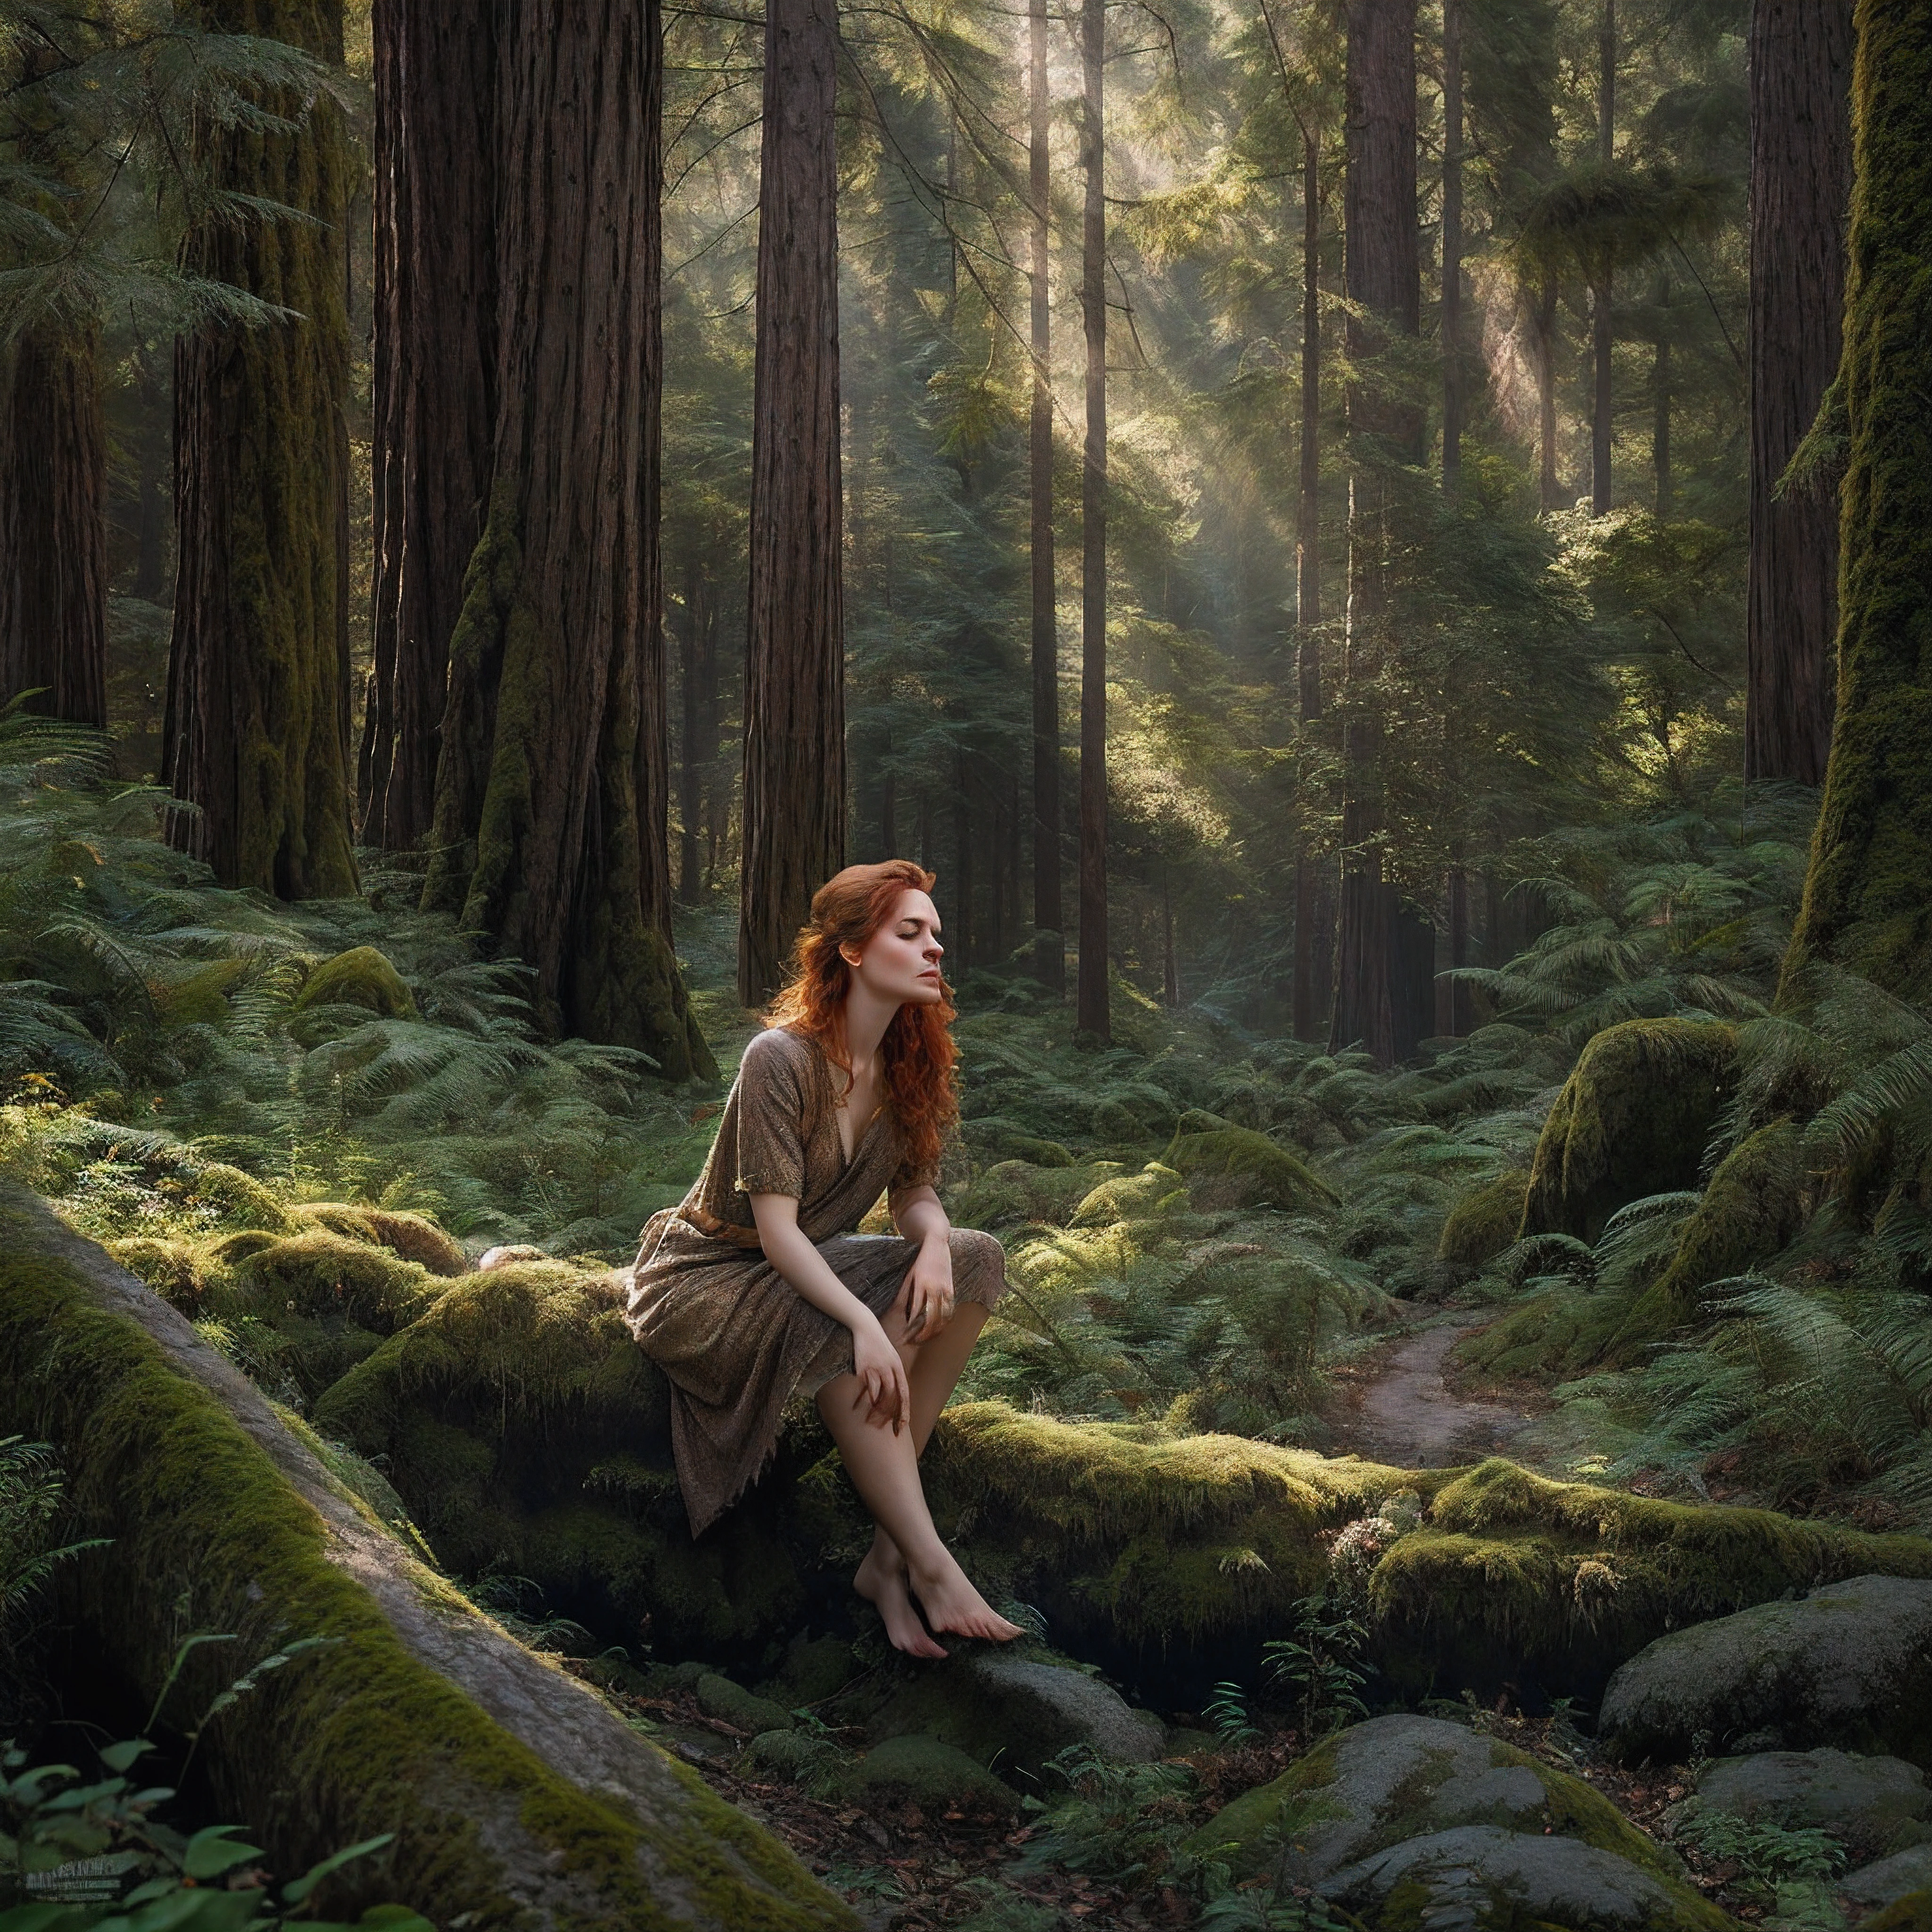 An exquisite portrait depicting a beautiful redheaded woman kneeling peacefully in a lush hidden glade surrounded by towering ancient redwood trees, eyes closed in pensive thought as speckled rays of sunshine filter down through the soaring canopy overhead, delicate features caressed by the dappled forest light, flawless skin adorned with endearing freckles that pop against the vivid emerald mosses blanketing the forest floor, fiery locks softly blowing in the gentle woodland breeze that carries the earthy scent of rain and cedar, masterfully composed in the style of a fine art photographic print, tonality rich and atmospherically moody like a cinematic still, intricate textures and film grain integrated seamlessly to capture the profound beauty of this primal forest sanctuary, overall craftsmanship superbly executed with extraordinary attention to detail, this stunning digital painting epitomizes photorealism meets imaginative artistry.